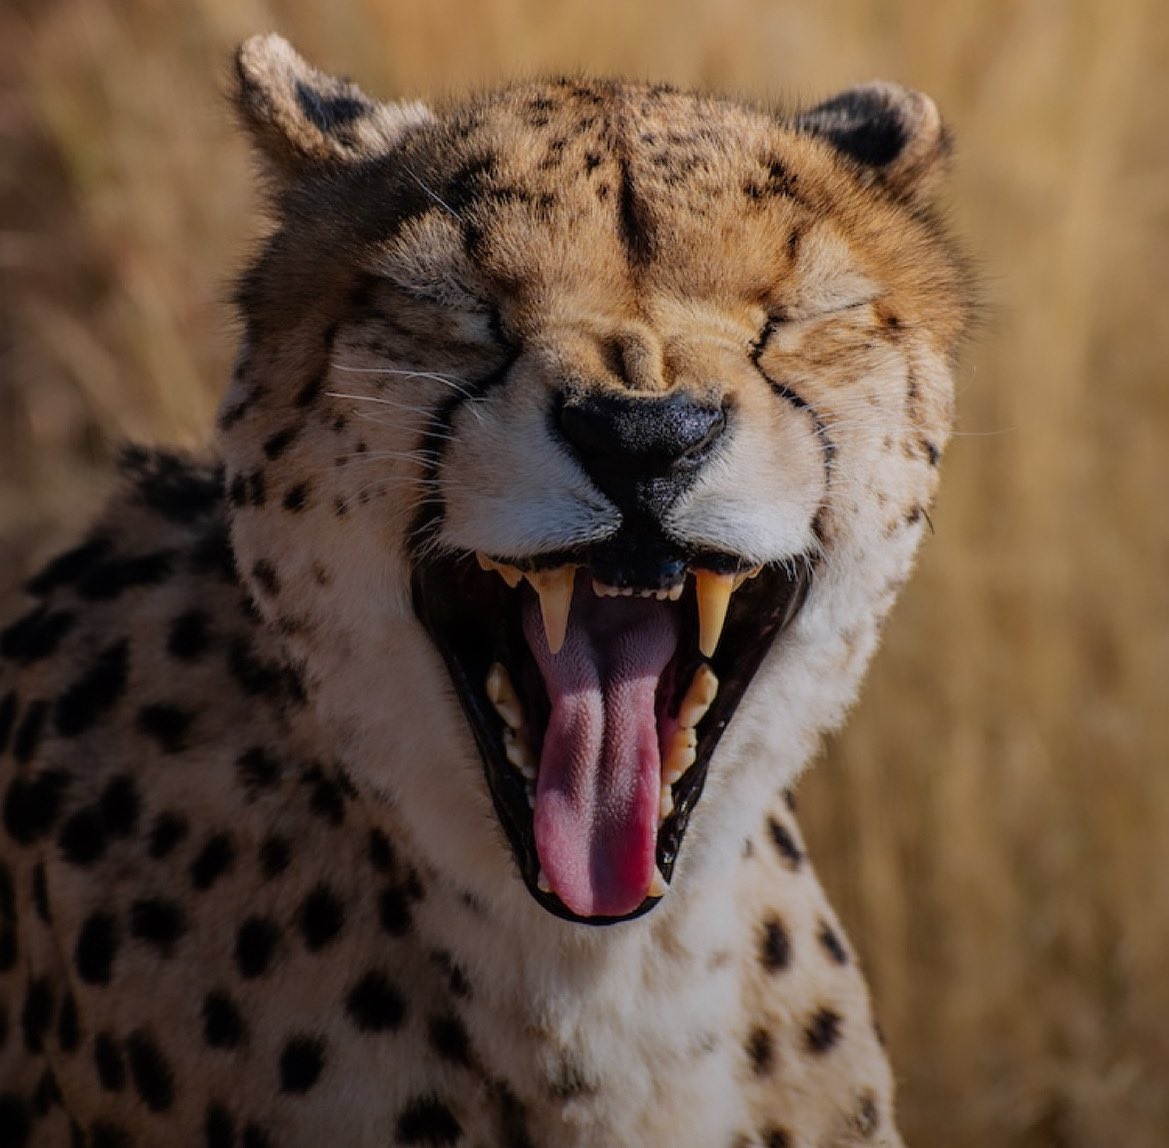 Toothache try hypnosis it’s great to reduce pain #toothache #painmanagement #tooth #bigcats #hypnosisworks #adventure #changingthenarrative #kensingtonhypnosis #notjustaheadache #protect-nature